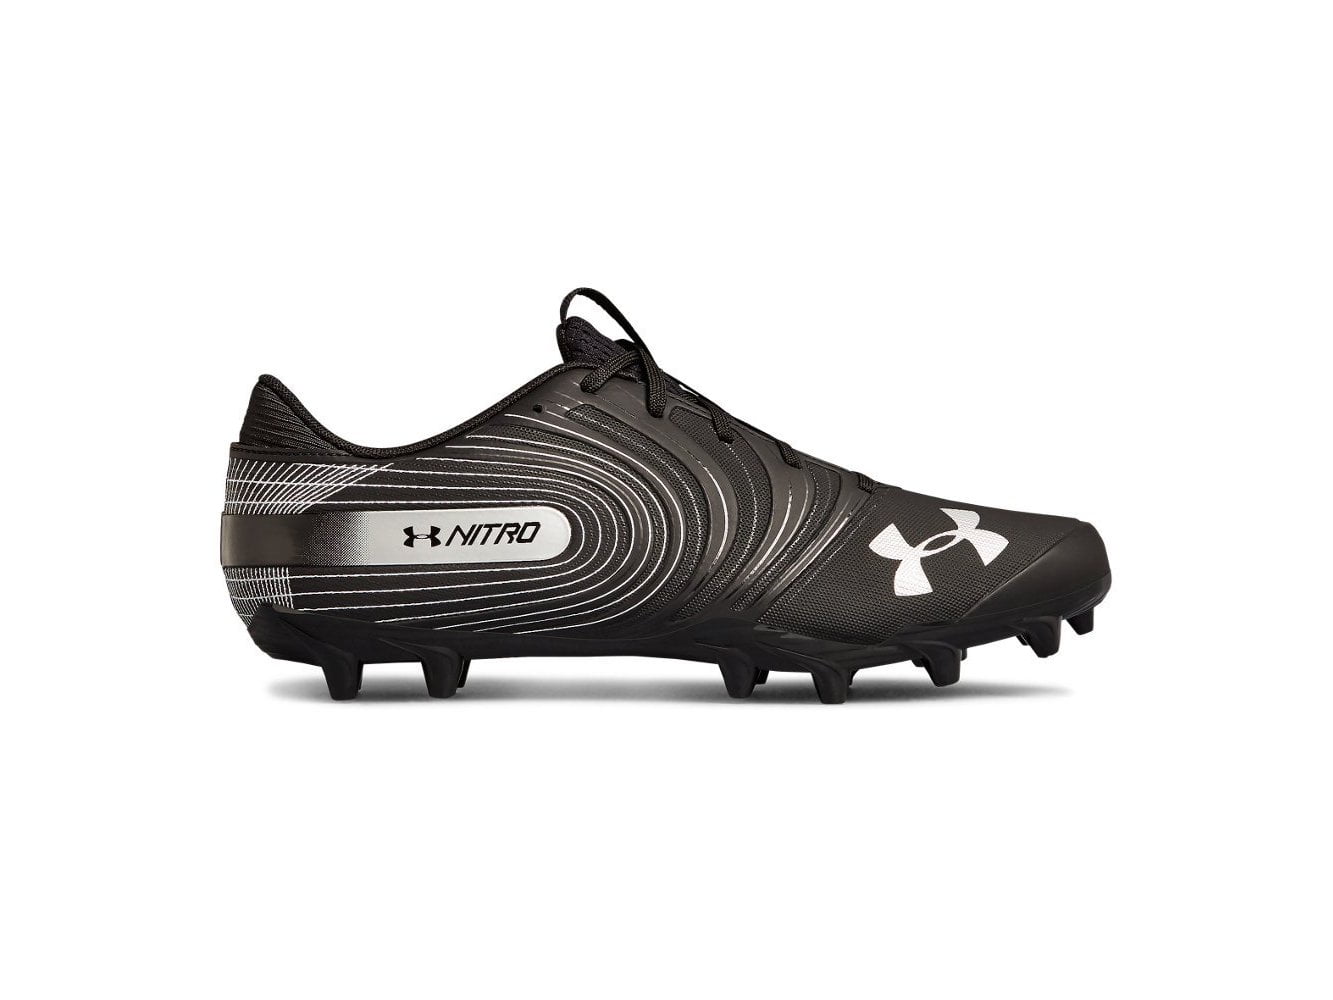 Under Armour Mens Nitro Low Mc Ankle-High Leather Football Shoe